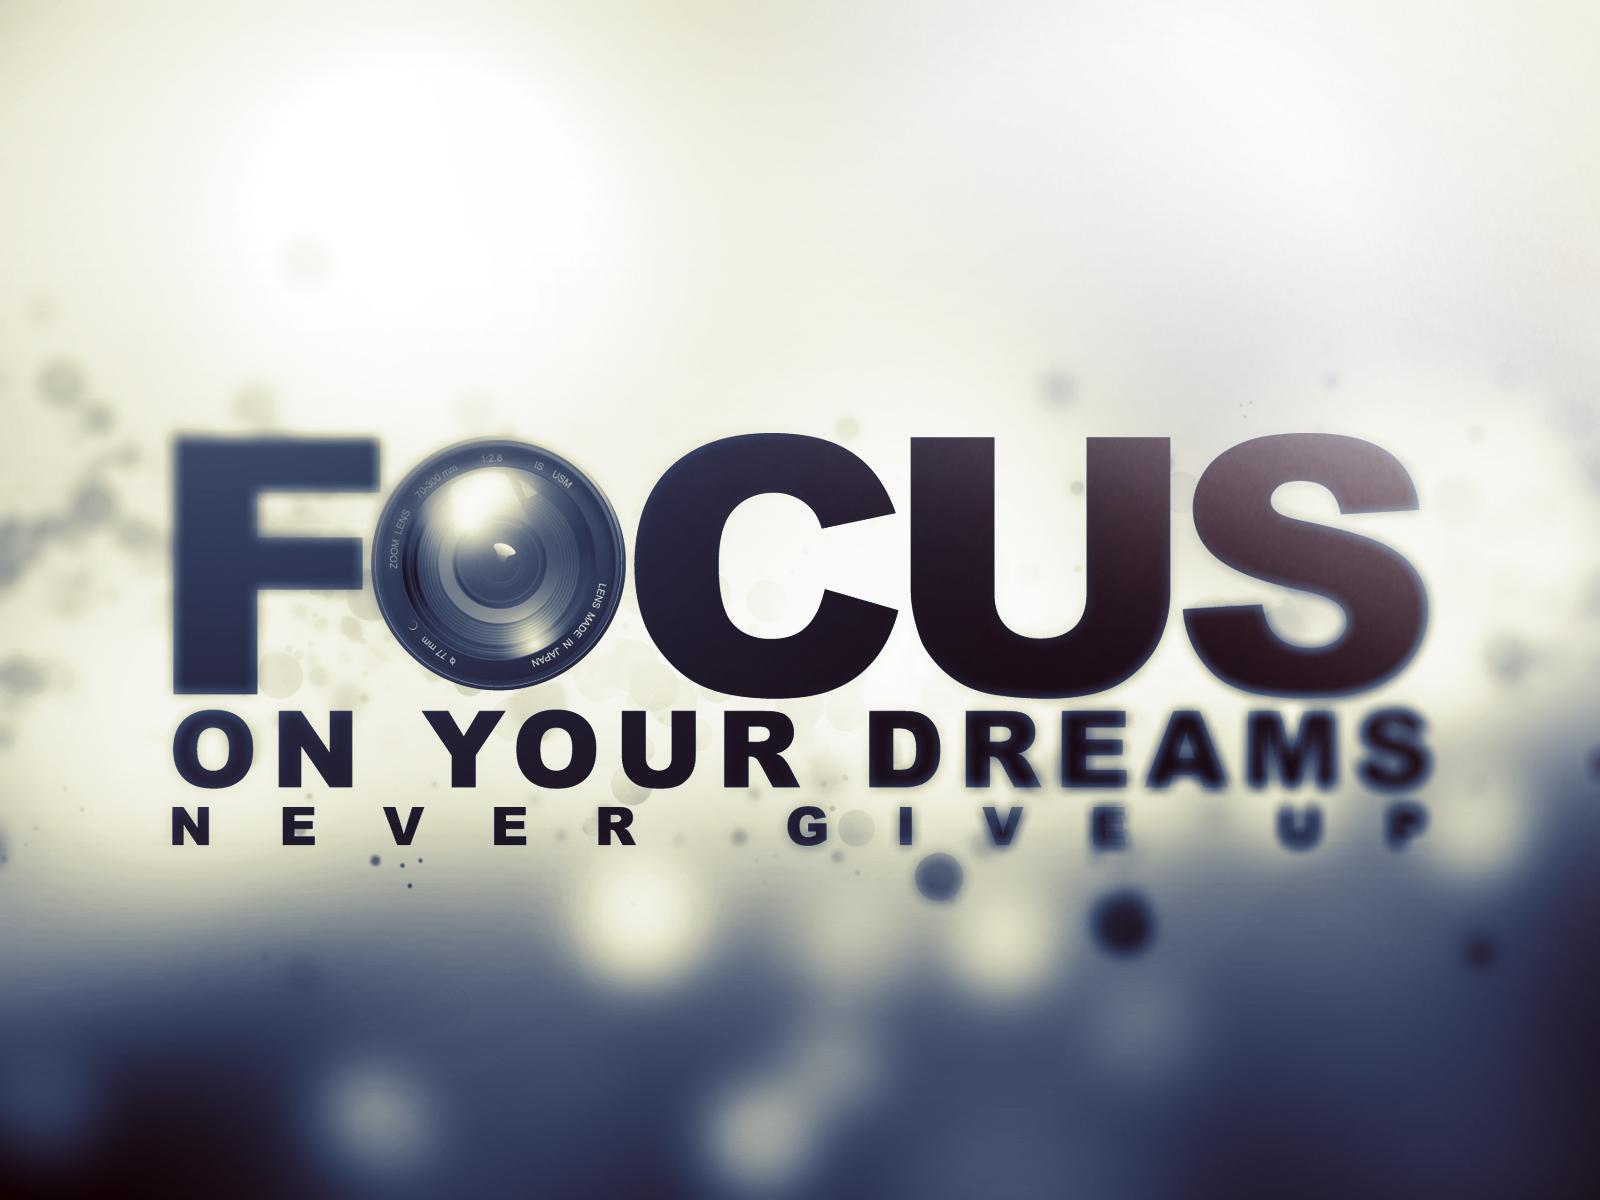 Focus Quotes Wallpapers - Wallpaper Cave